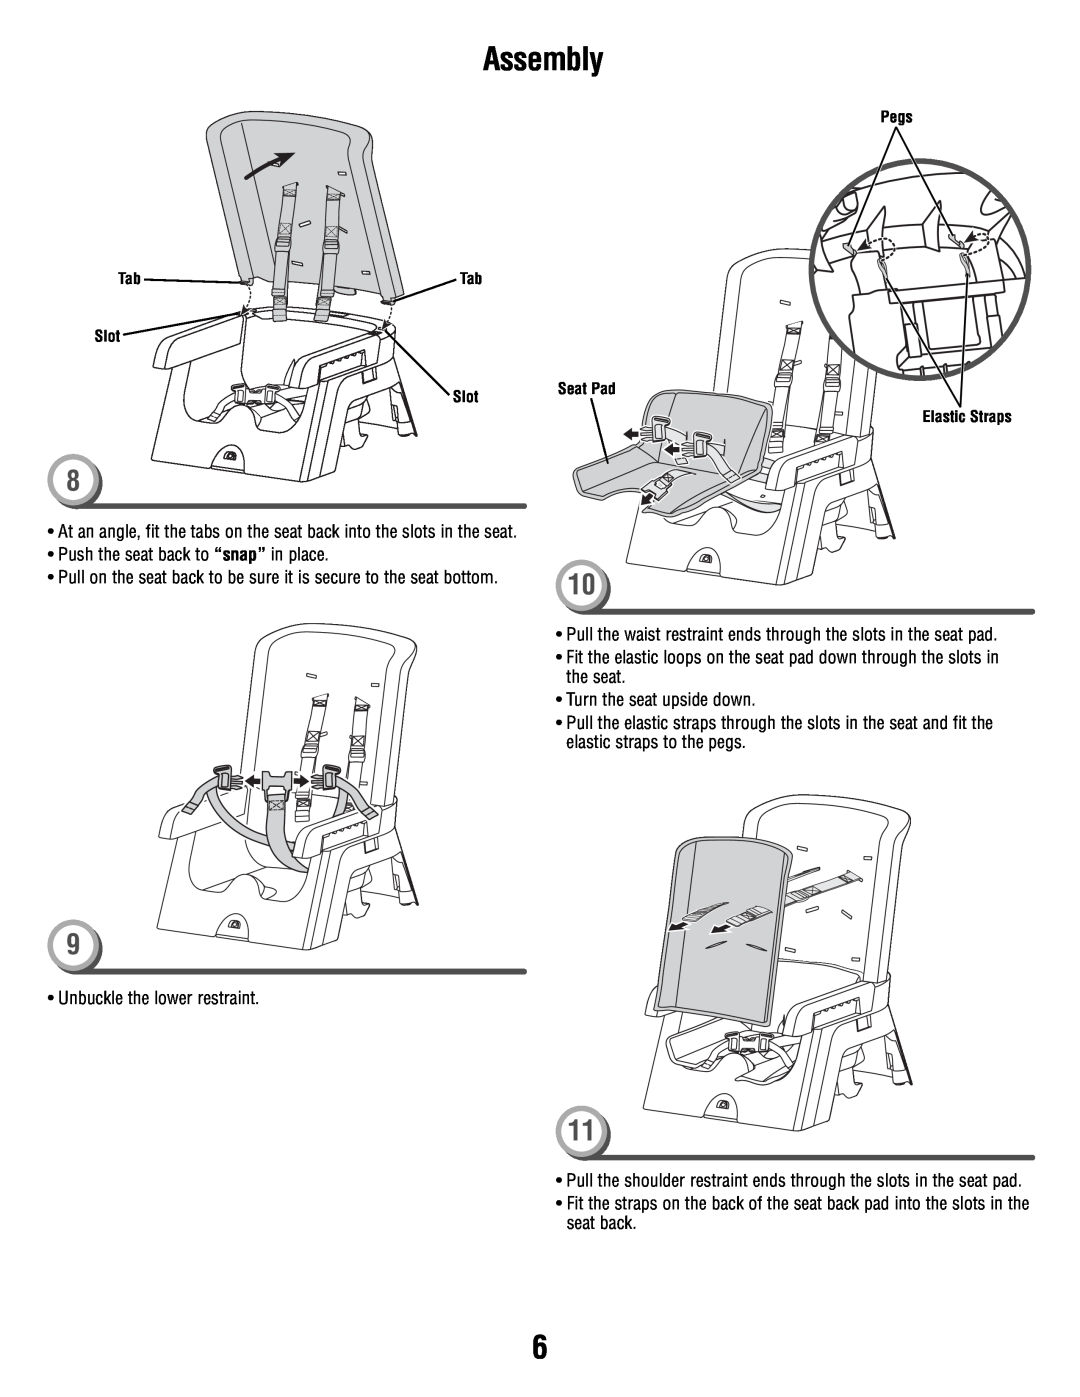 Fisher-Price P9043 manual Assembly, Push the seat back to “snap” in place 